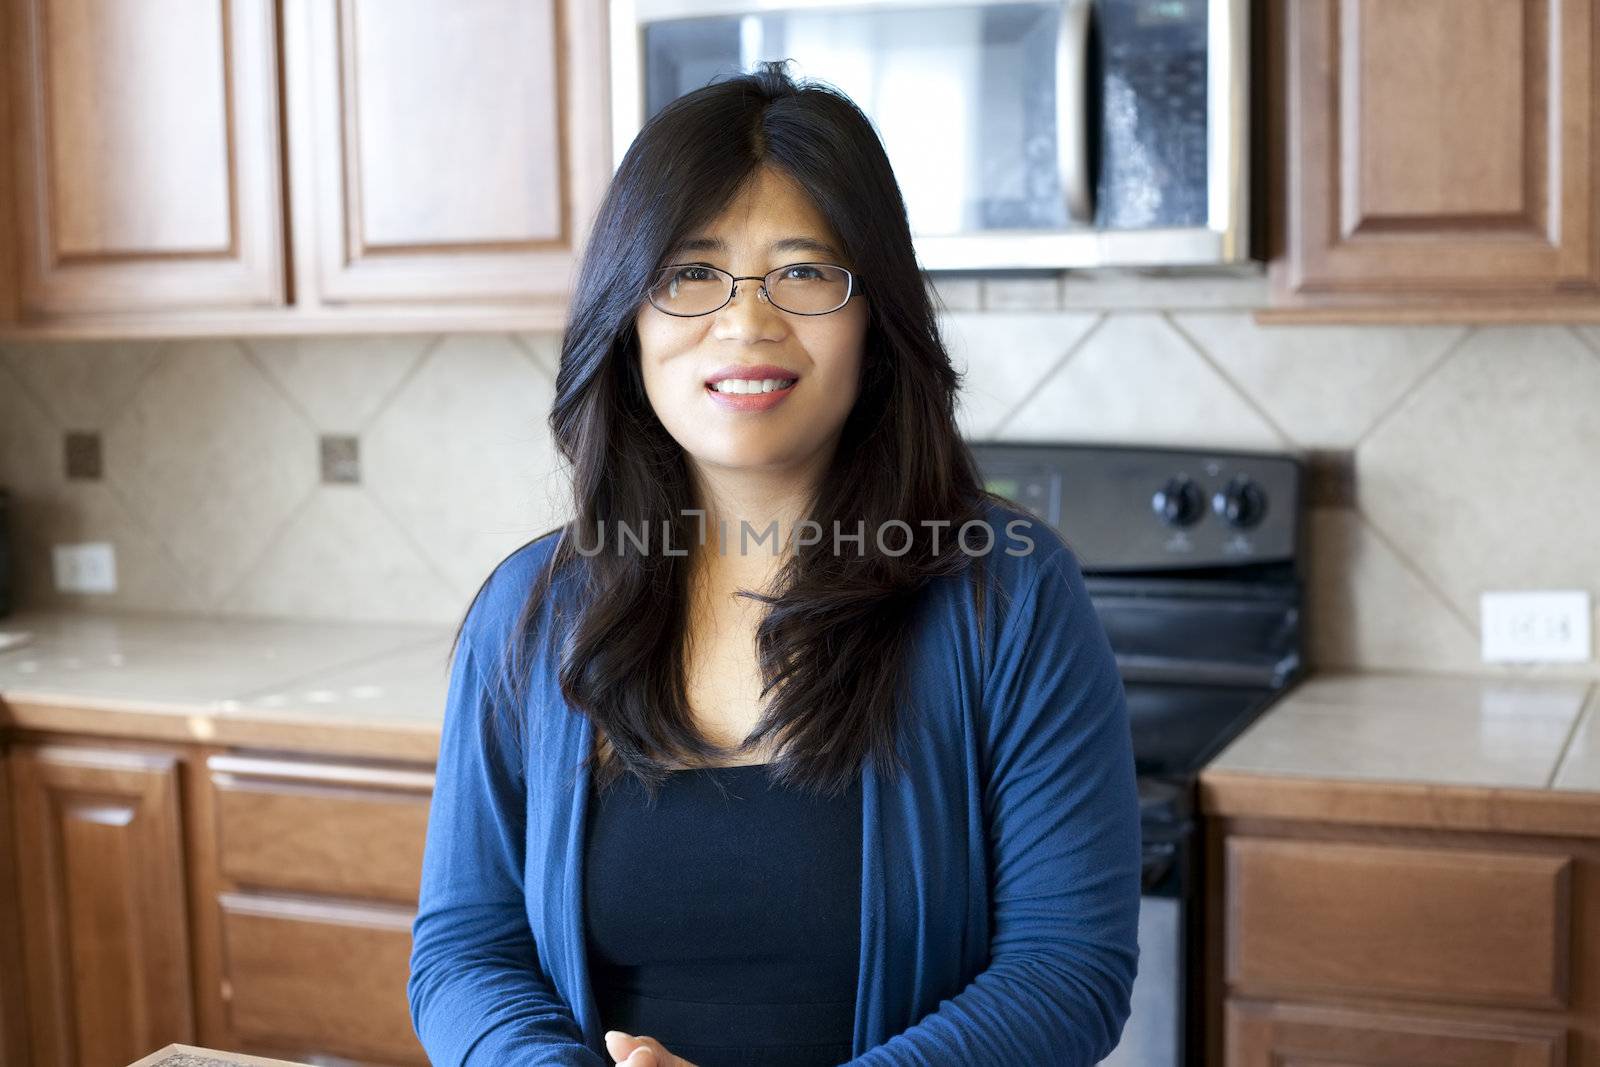 Beautiful Asian woman in early forties standing in kitchen, stove and cabinets in background